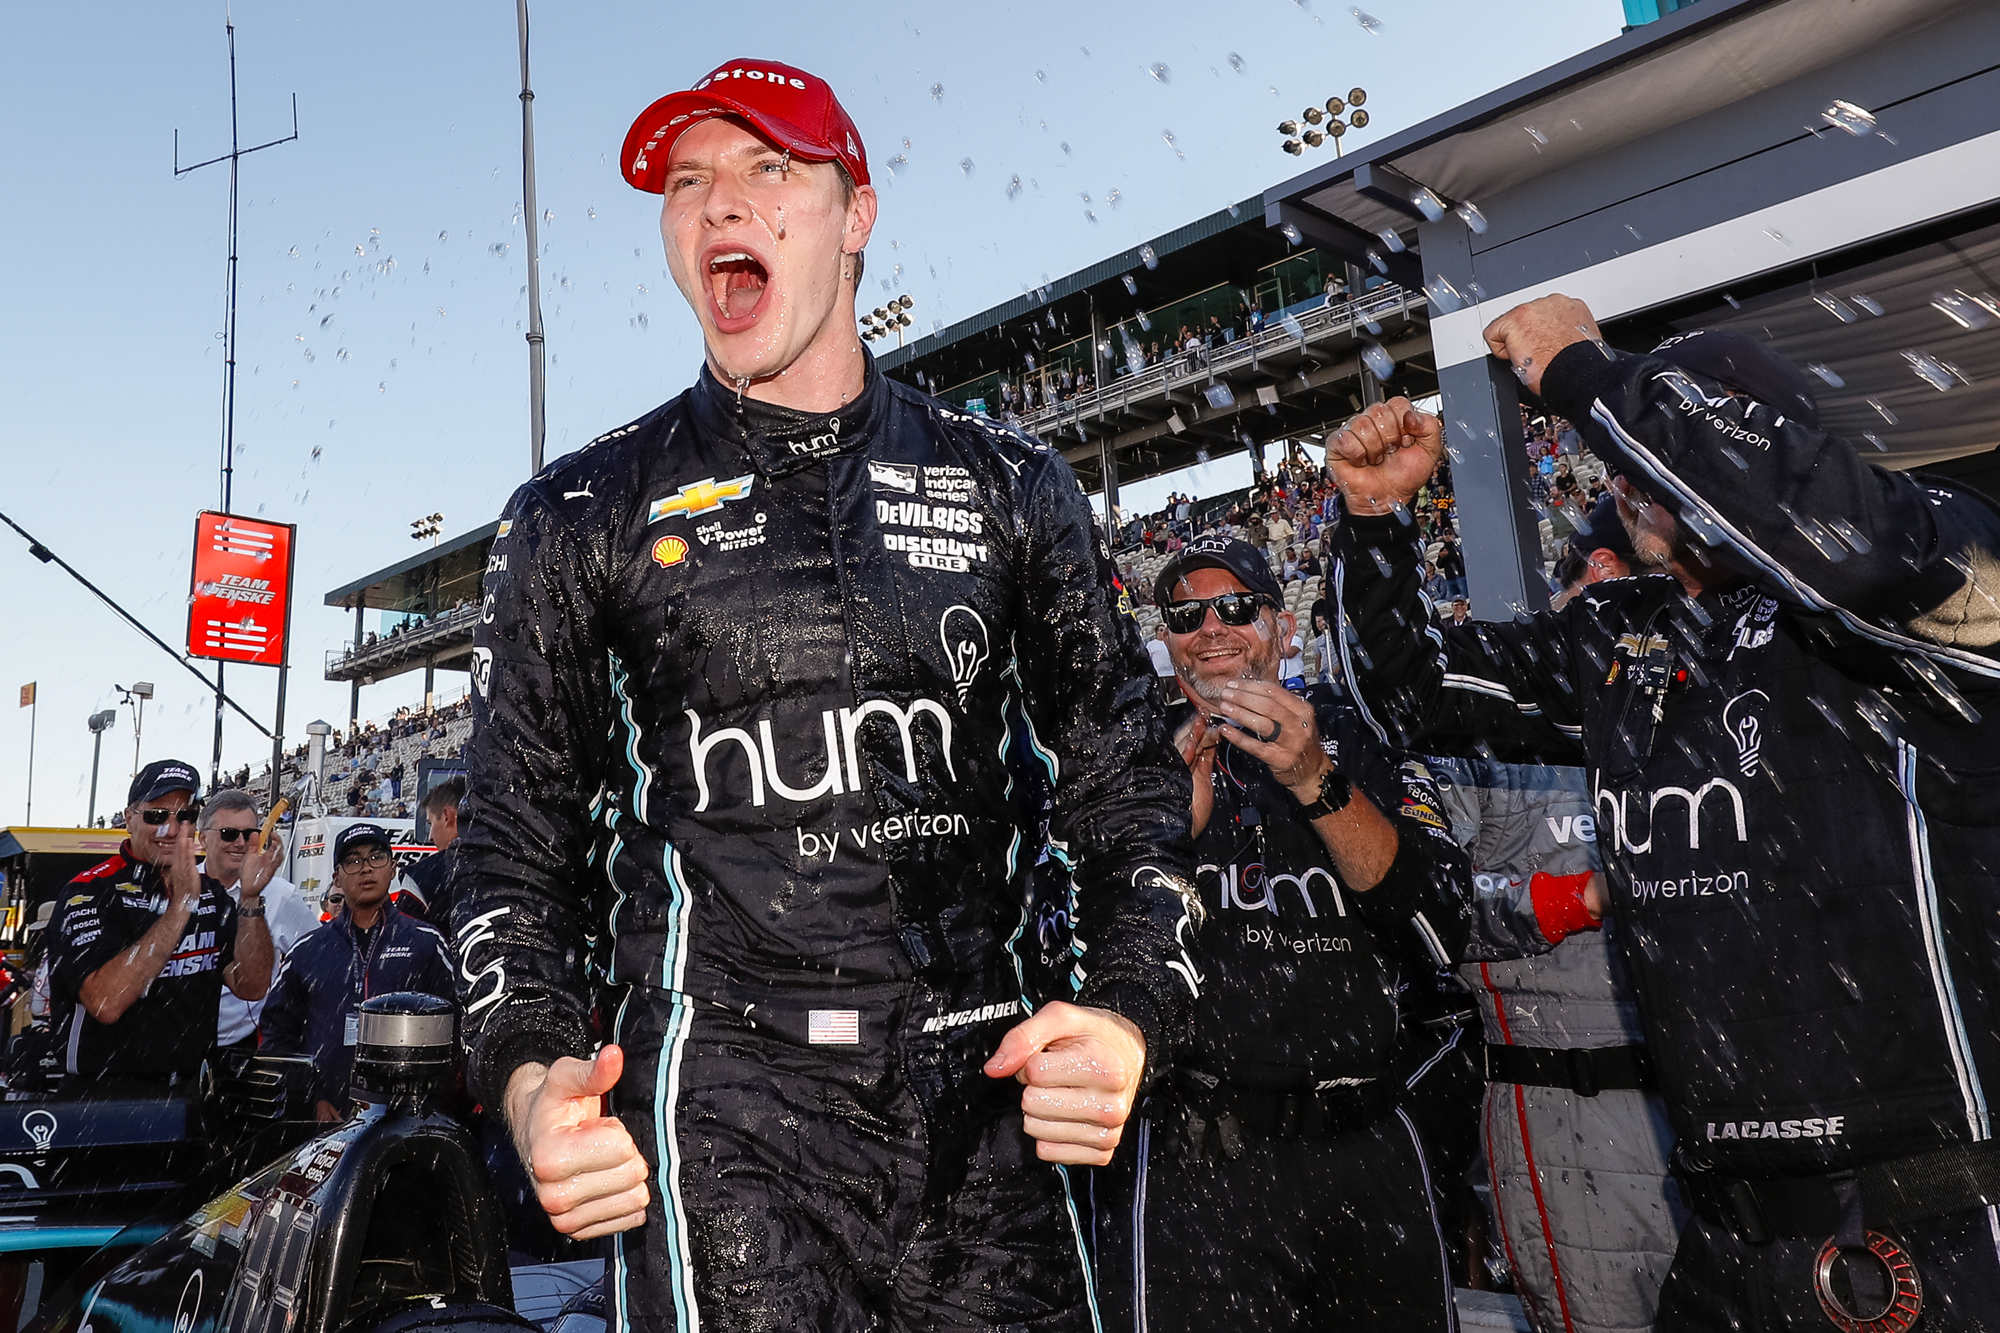 Will Newgarden become the face of IndyCar? Doubtful, as no one tuns into NBCSN to watch the races to know who he is